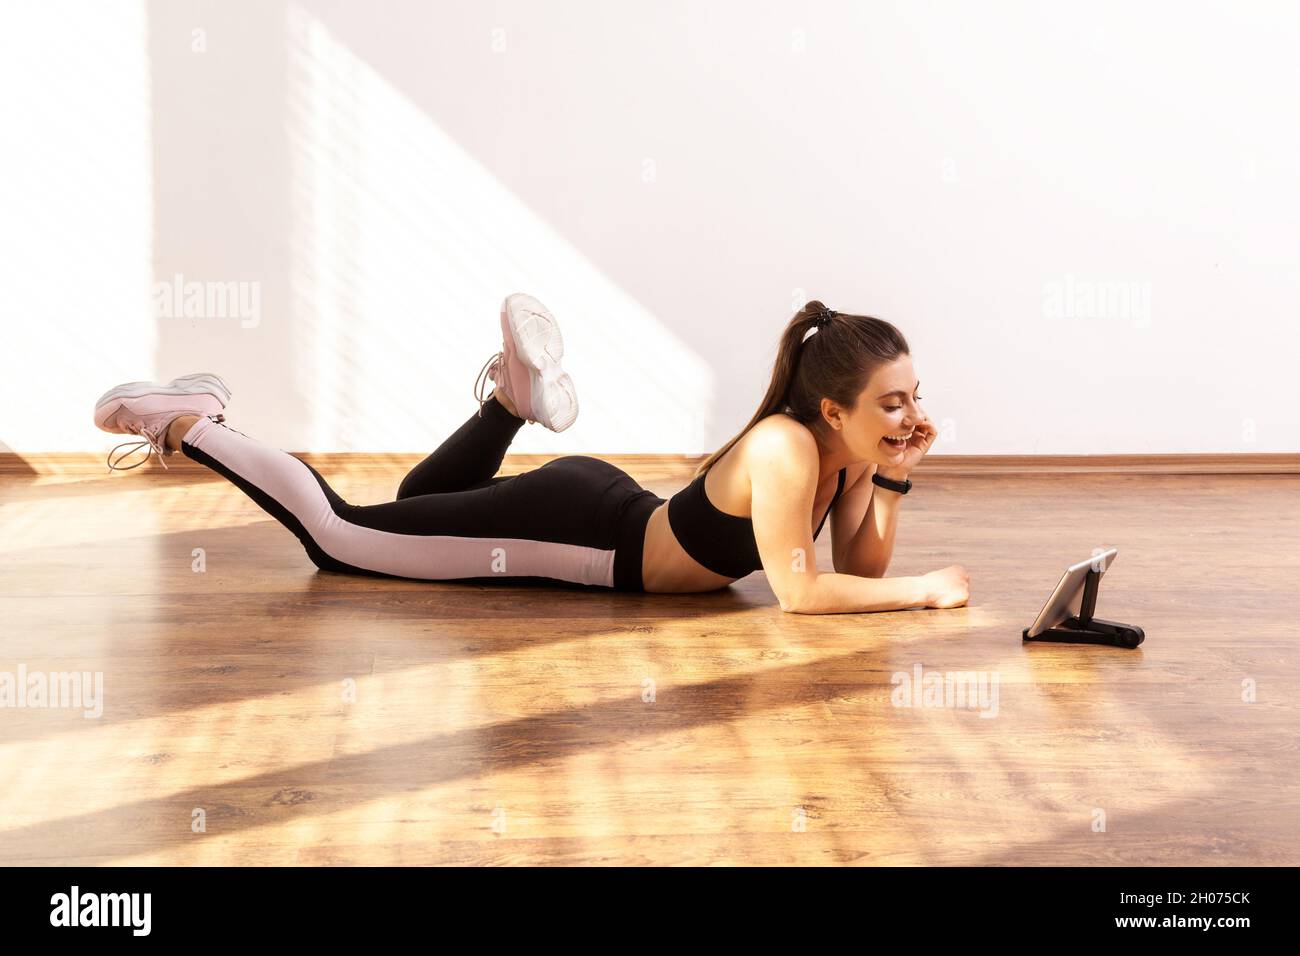 Slim female lying on floor and watching video about fitness exercising at home, looks happy, wearing black sports top and tights. Full length studio shot illuminated by sunlight from window. Stock Photo